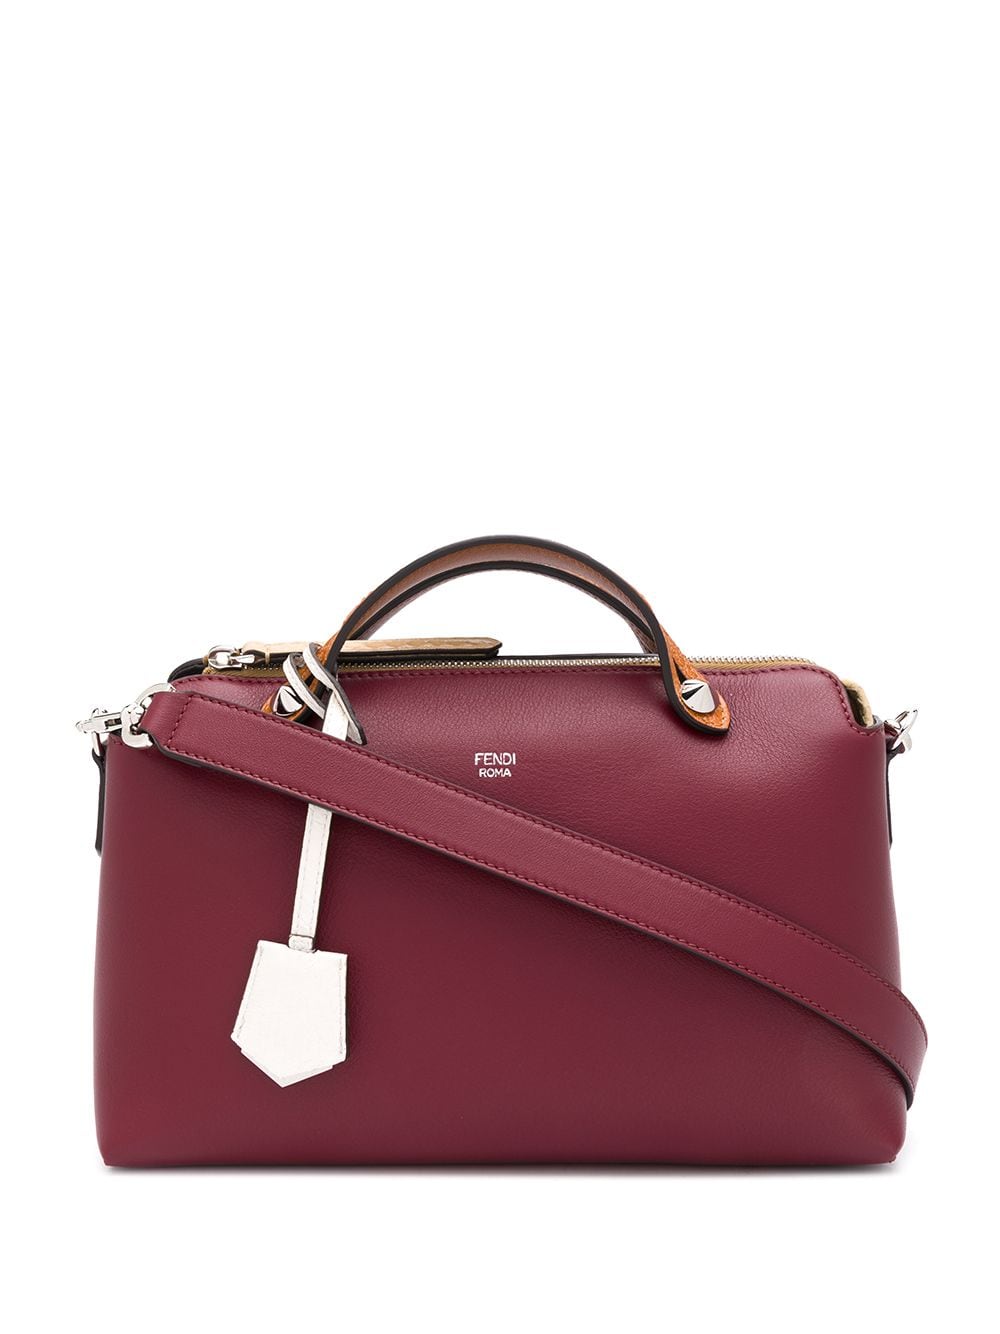 Shop Fendi By The Way tote bag with Express Delivery - FARFETCH